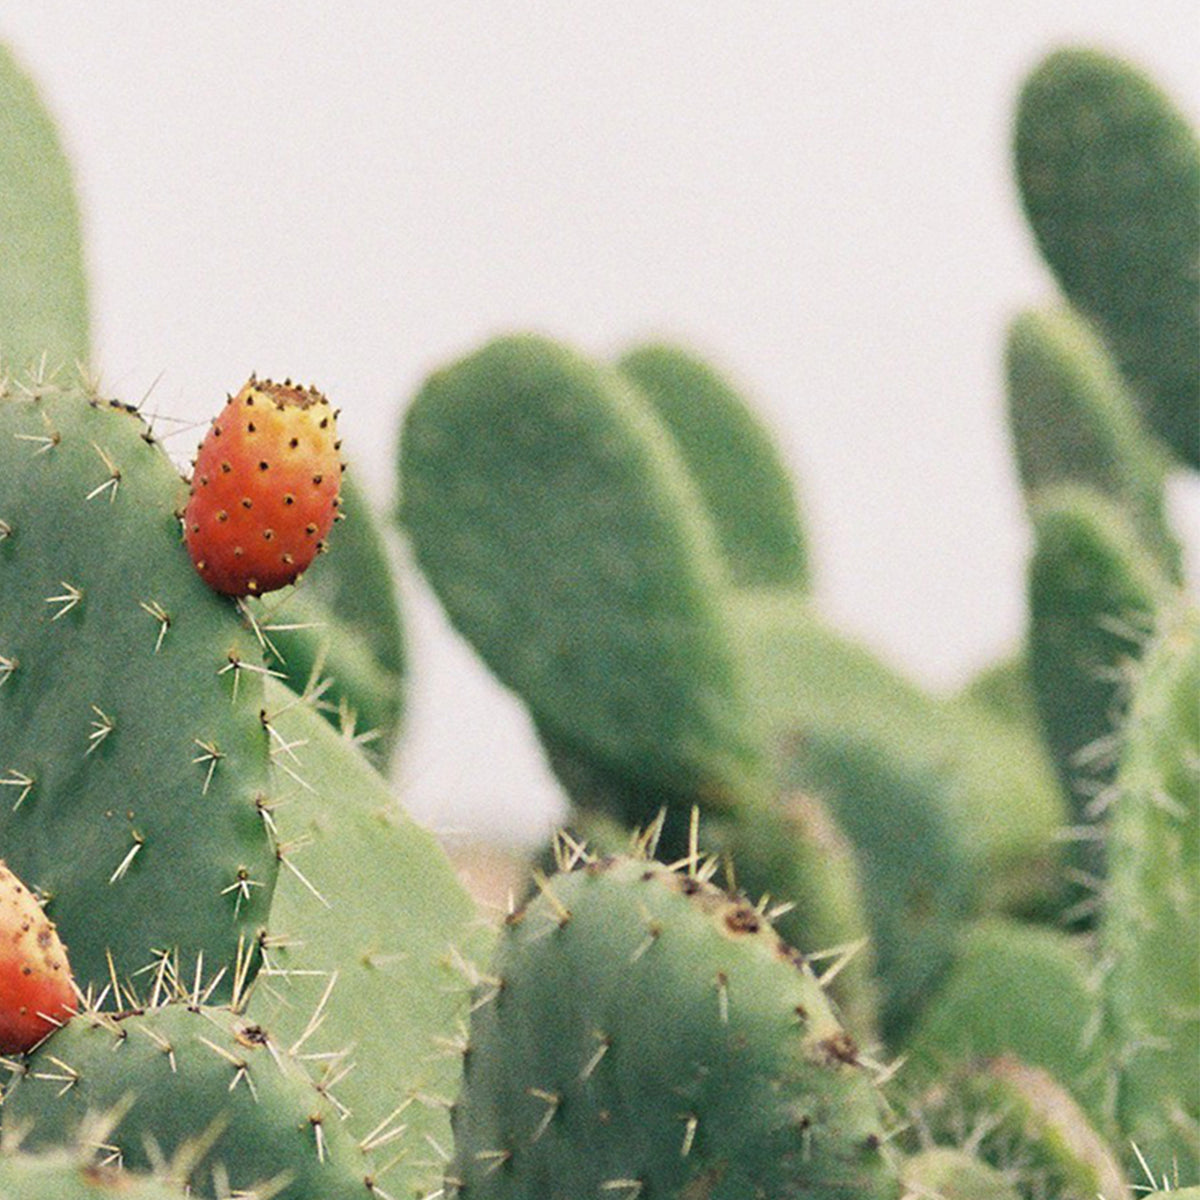 Prickly Pear Seed Cactus Oil - Moroccan Elixir